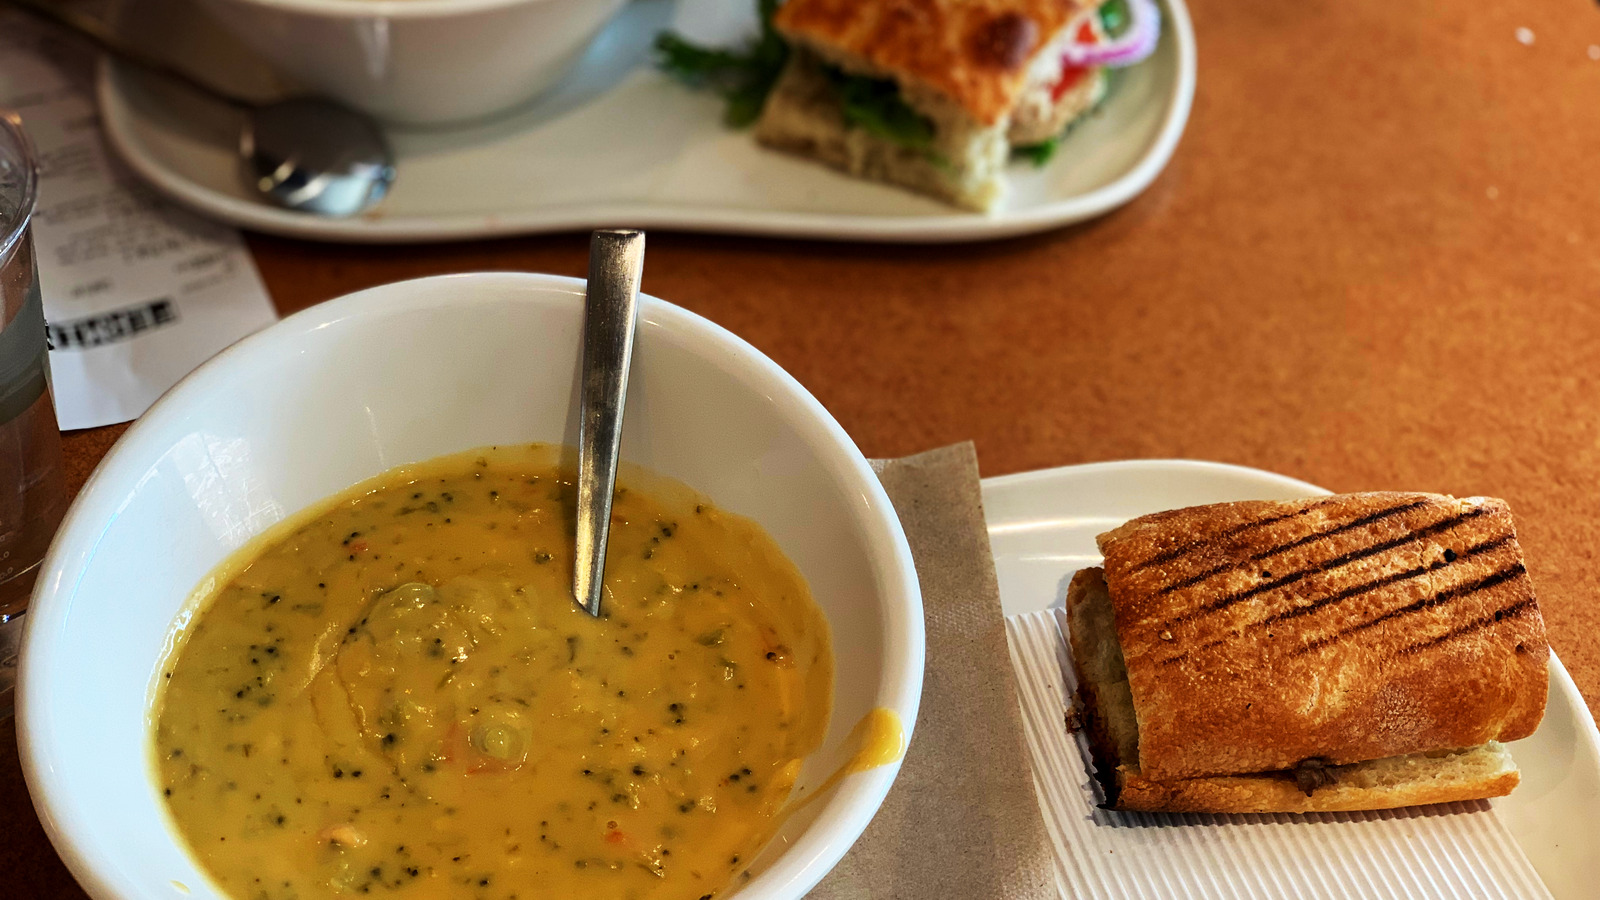 https://www.mashed.com/img/gallery/nearly-39-said-this-was-the-best-soup-at-panera-bread/l-intro-1637796442.jpg